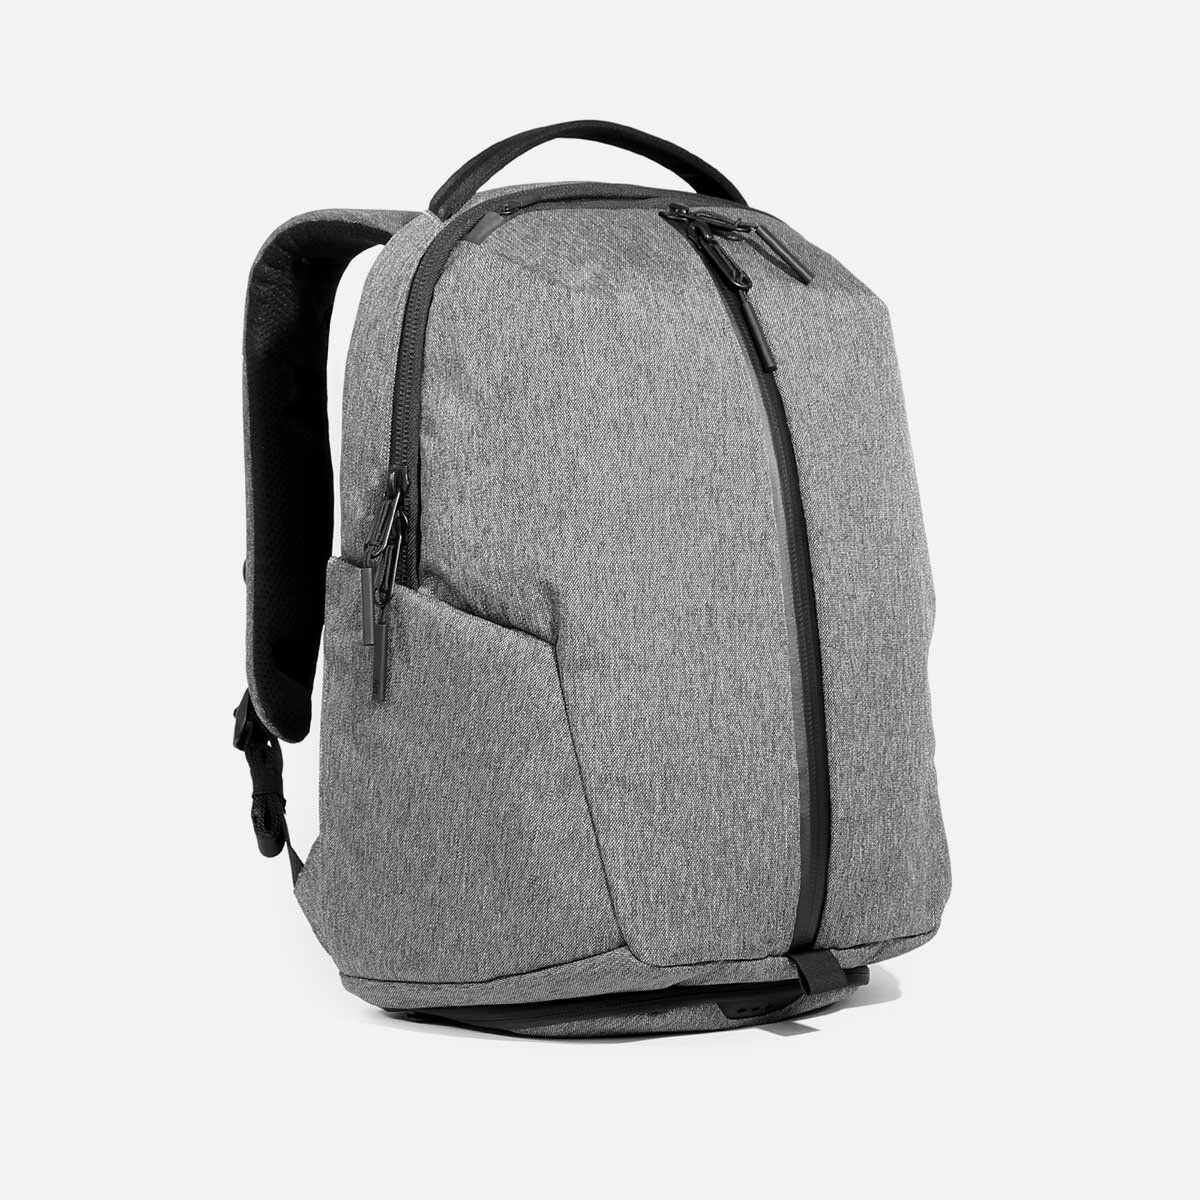 Stylish Laptop Backpack Travel Backpack with Removable Sling Bag Christmas Winter 